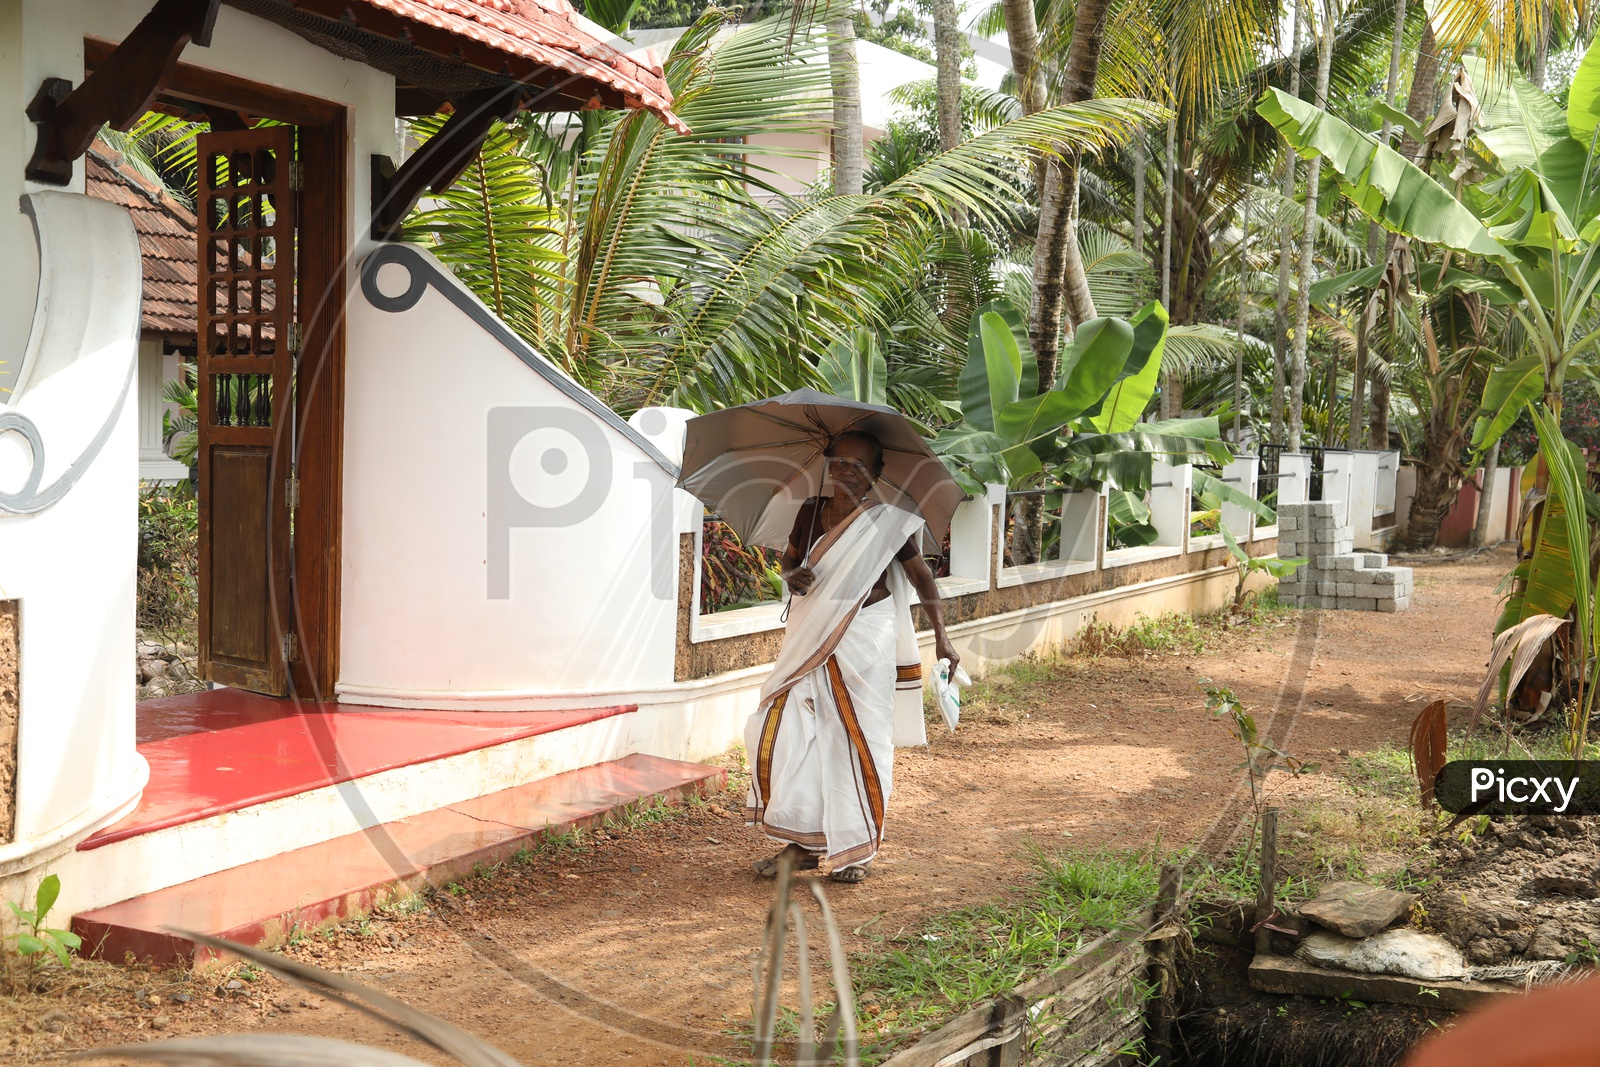 Old keralite woman walking with an umbrella along the road